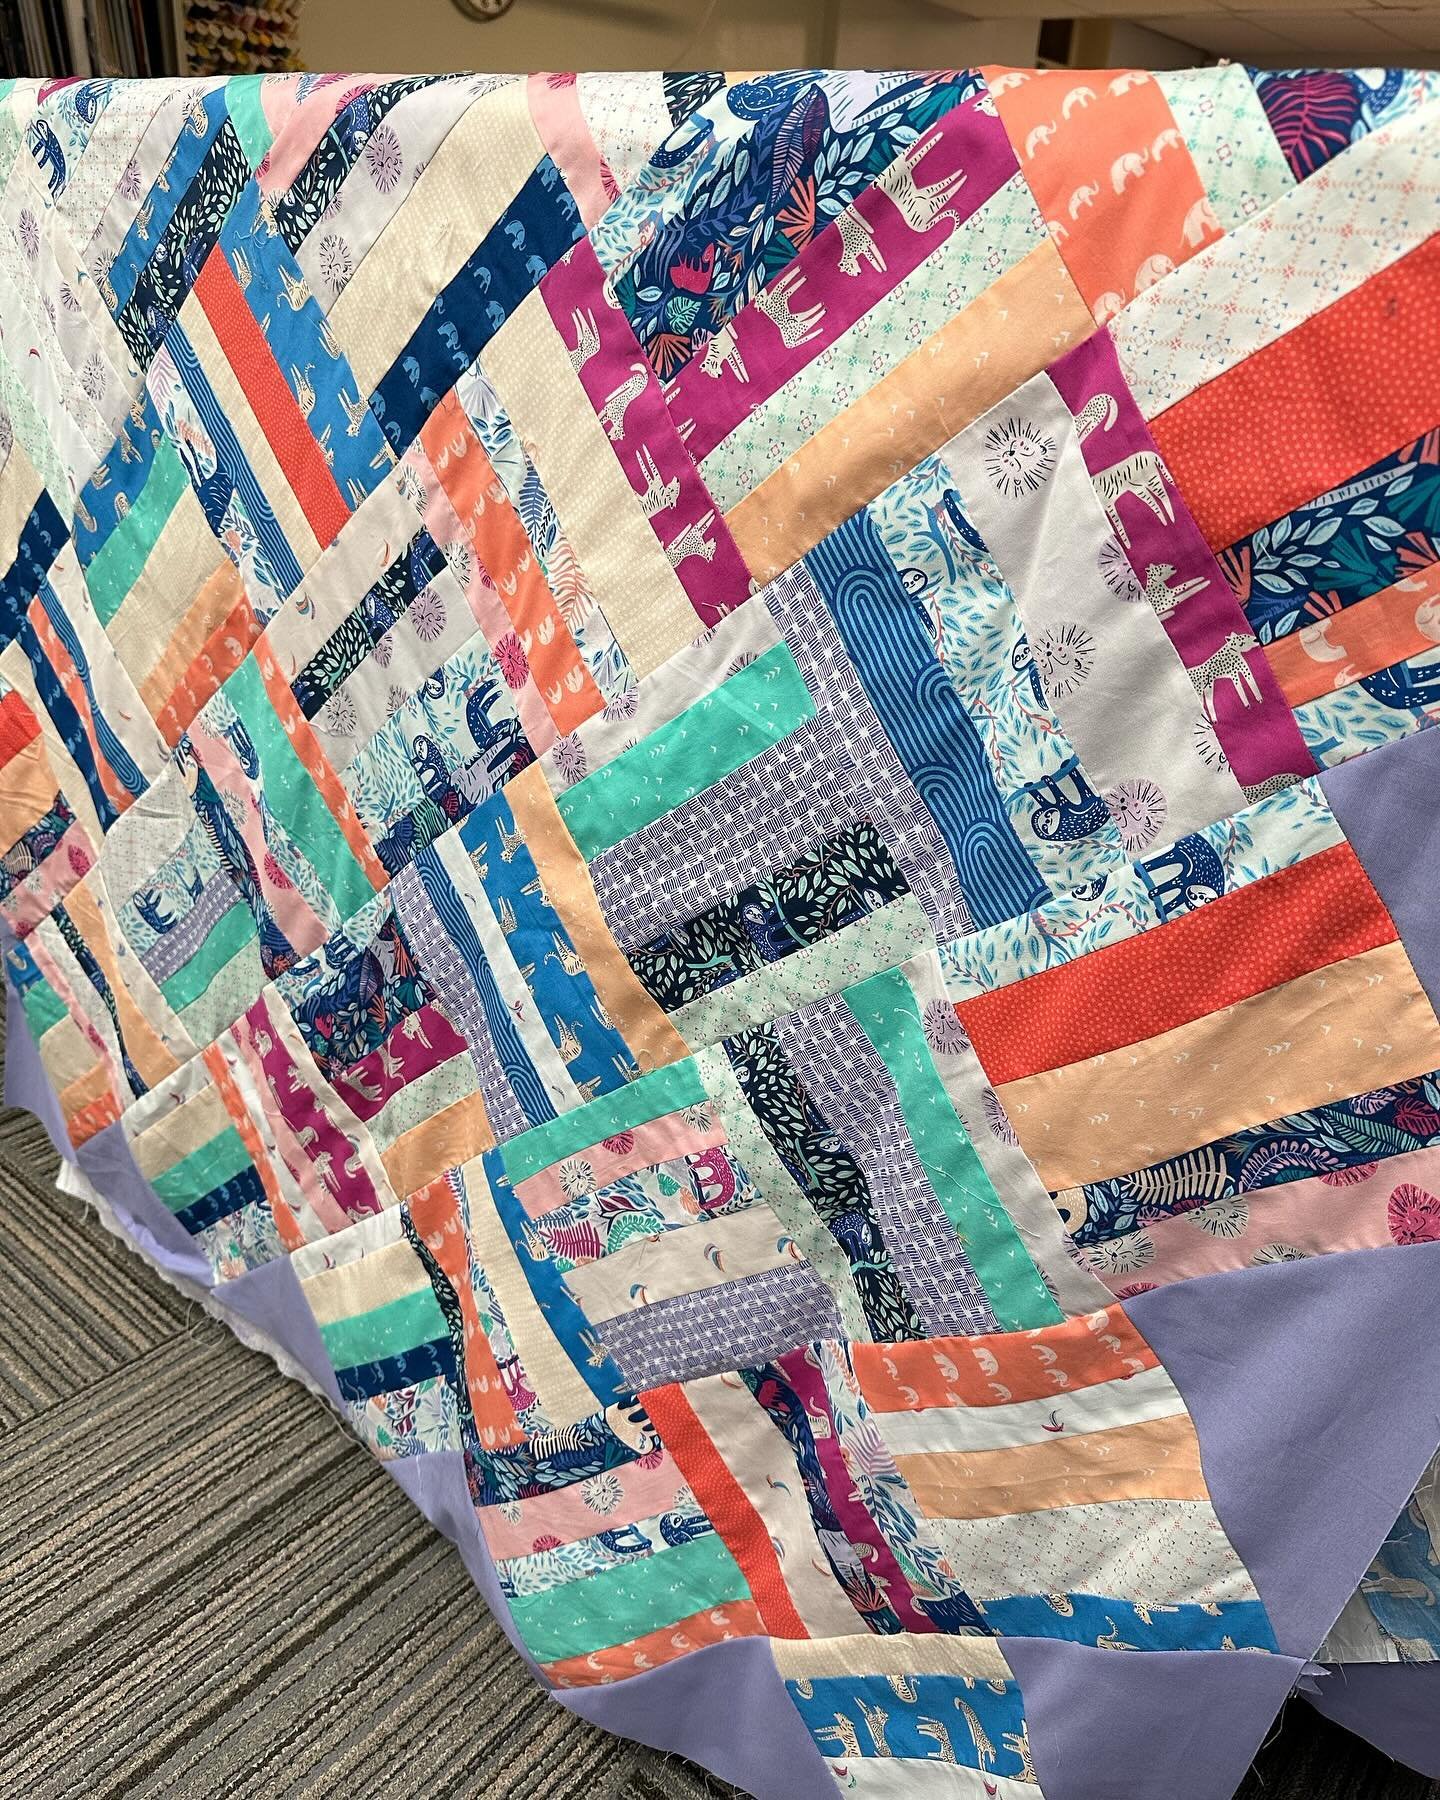 So happy to be quilting again! Stay tuned for the finish&hellip;
#Longarmquilting #customerquilts